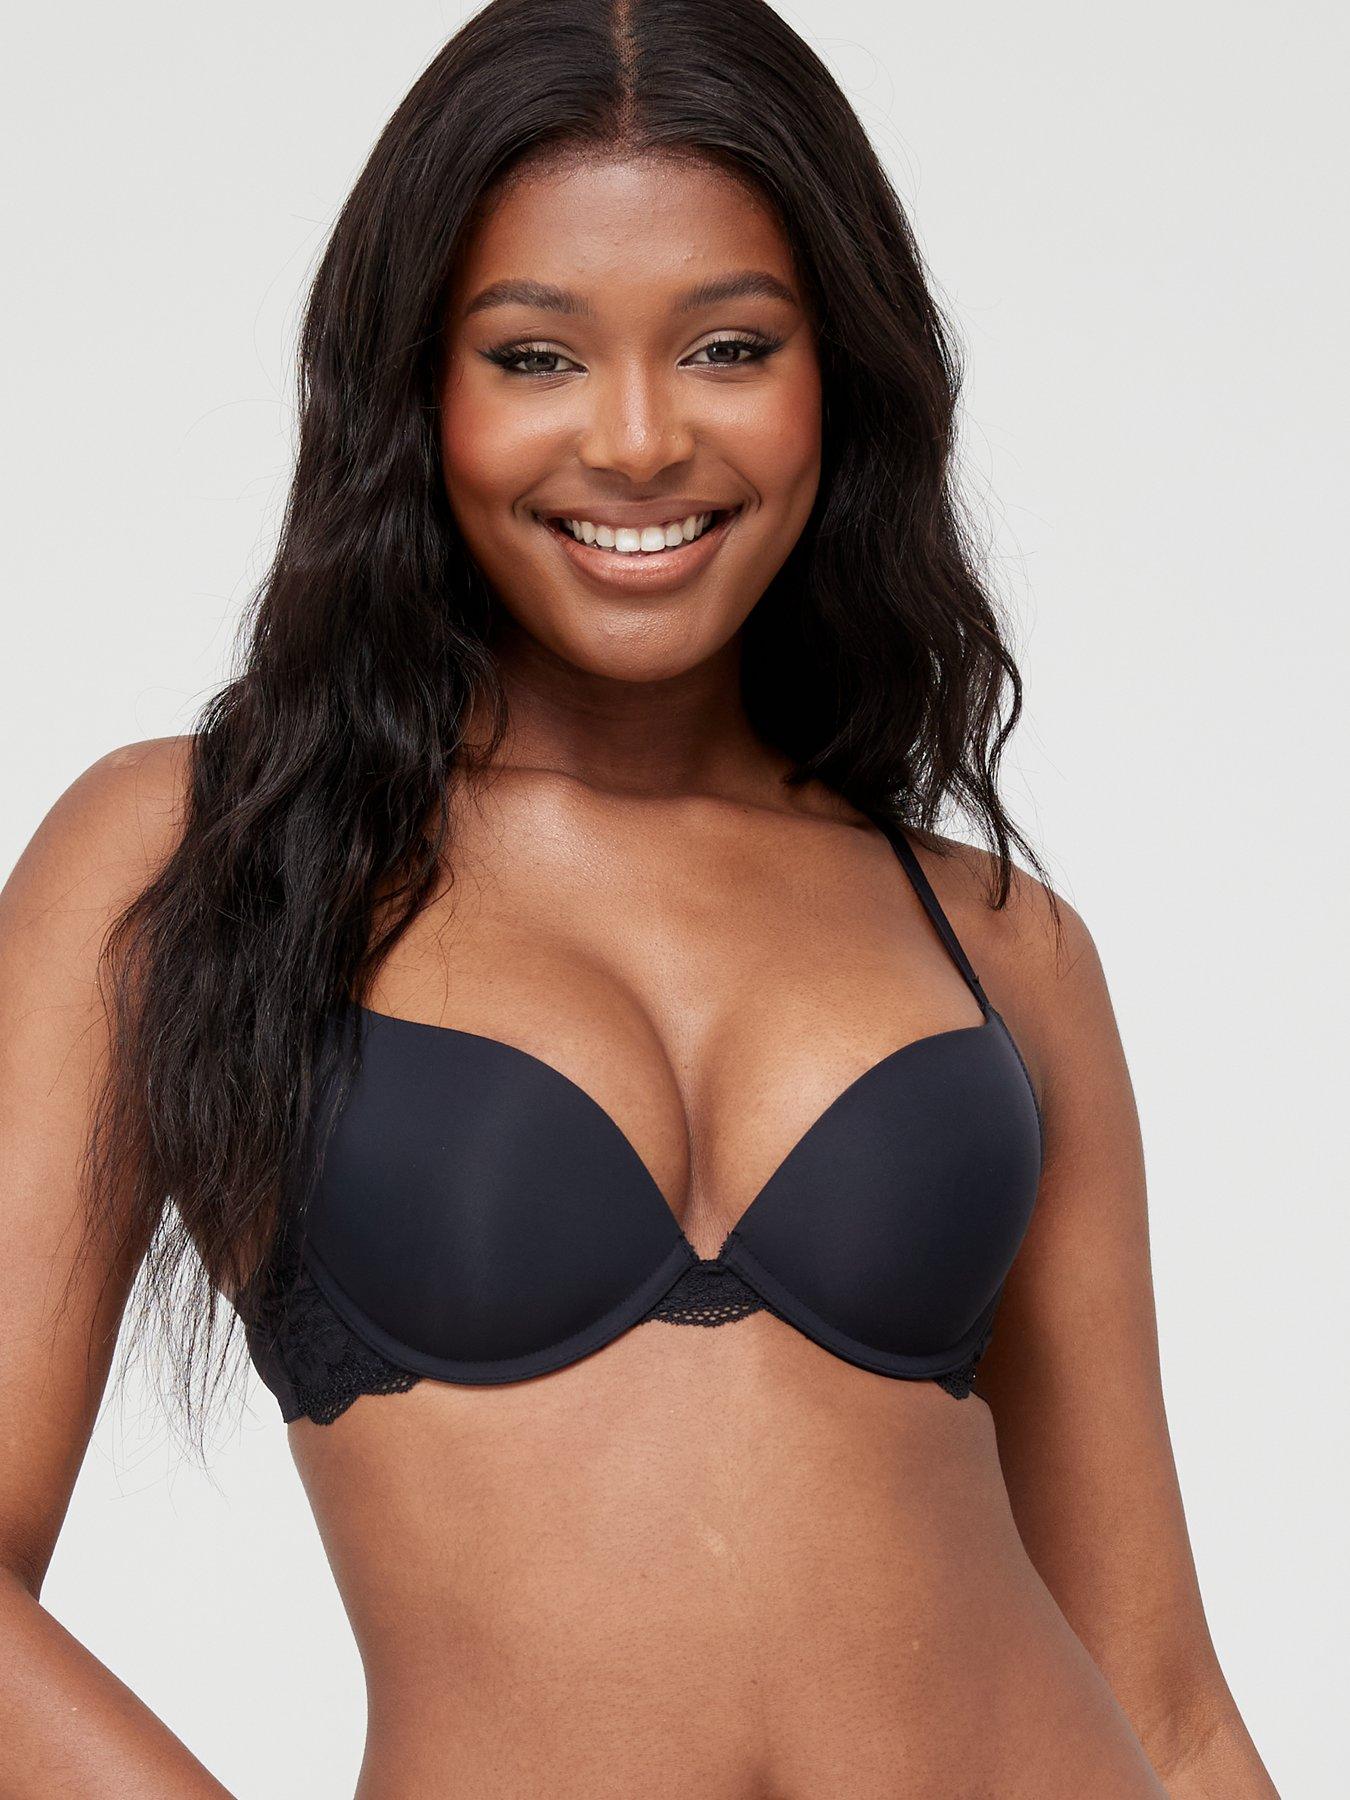 The Upbra: Helps Boost Cleavage for a Sexier Figure - Beauty Cooks Kisses